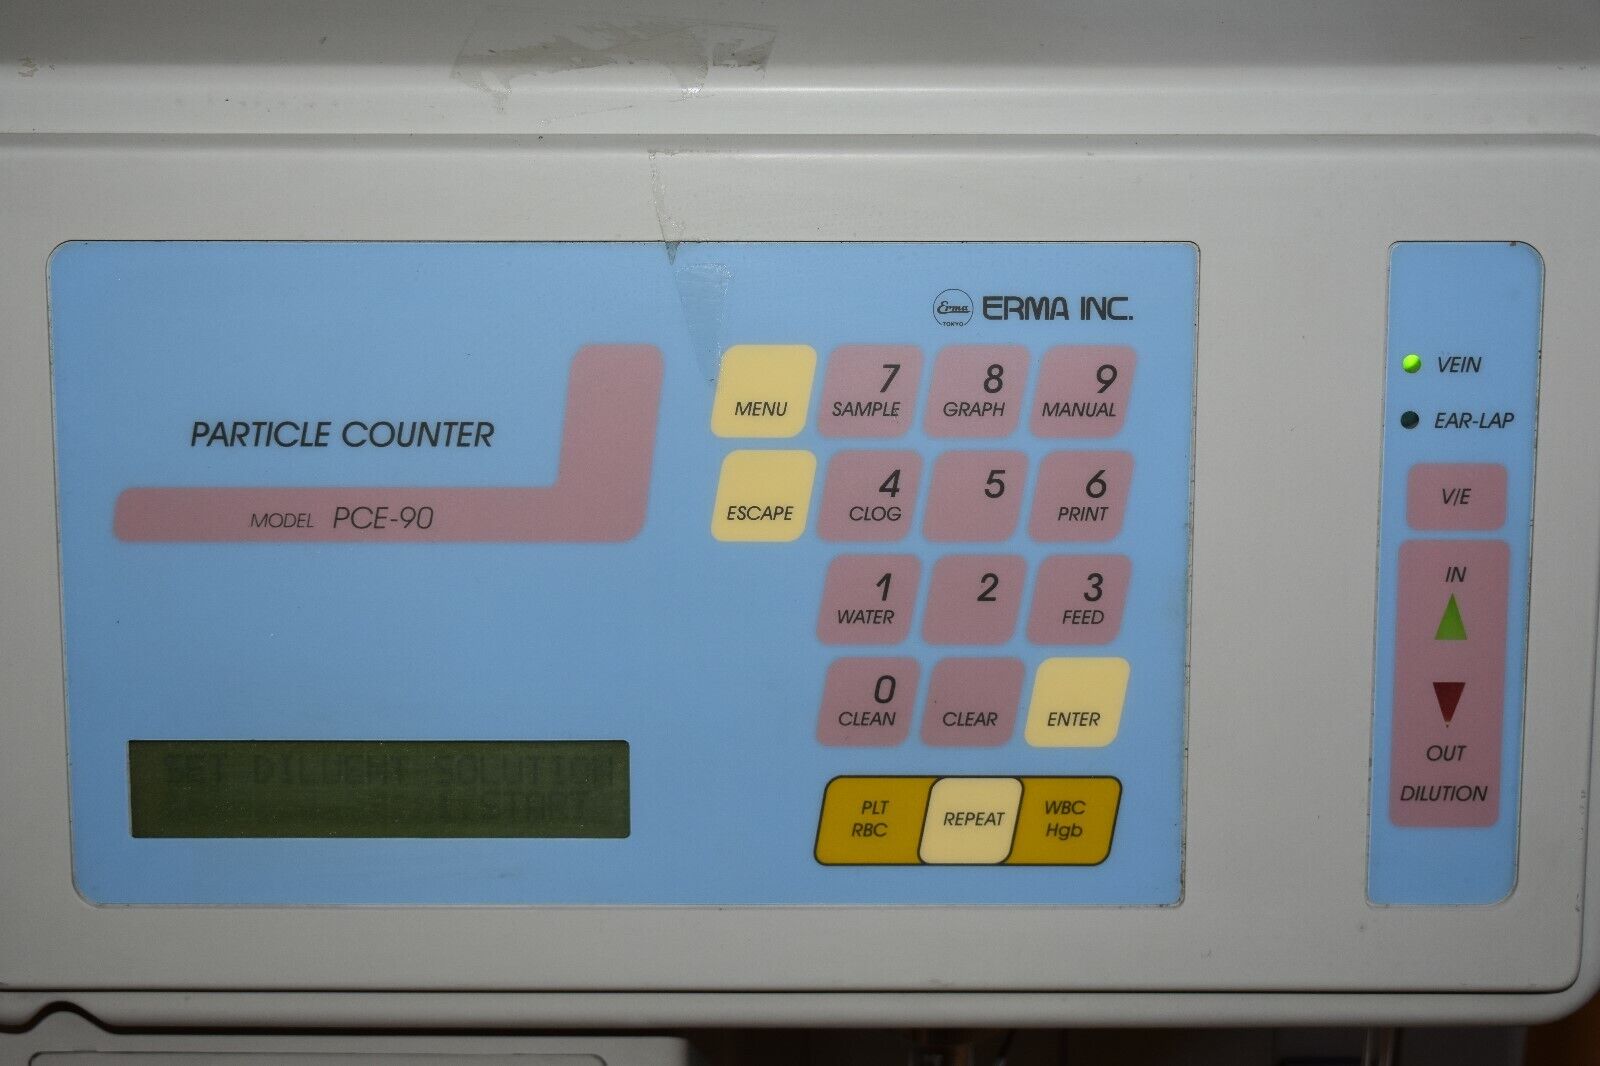 PARTICLE COUNTER PCE-90